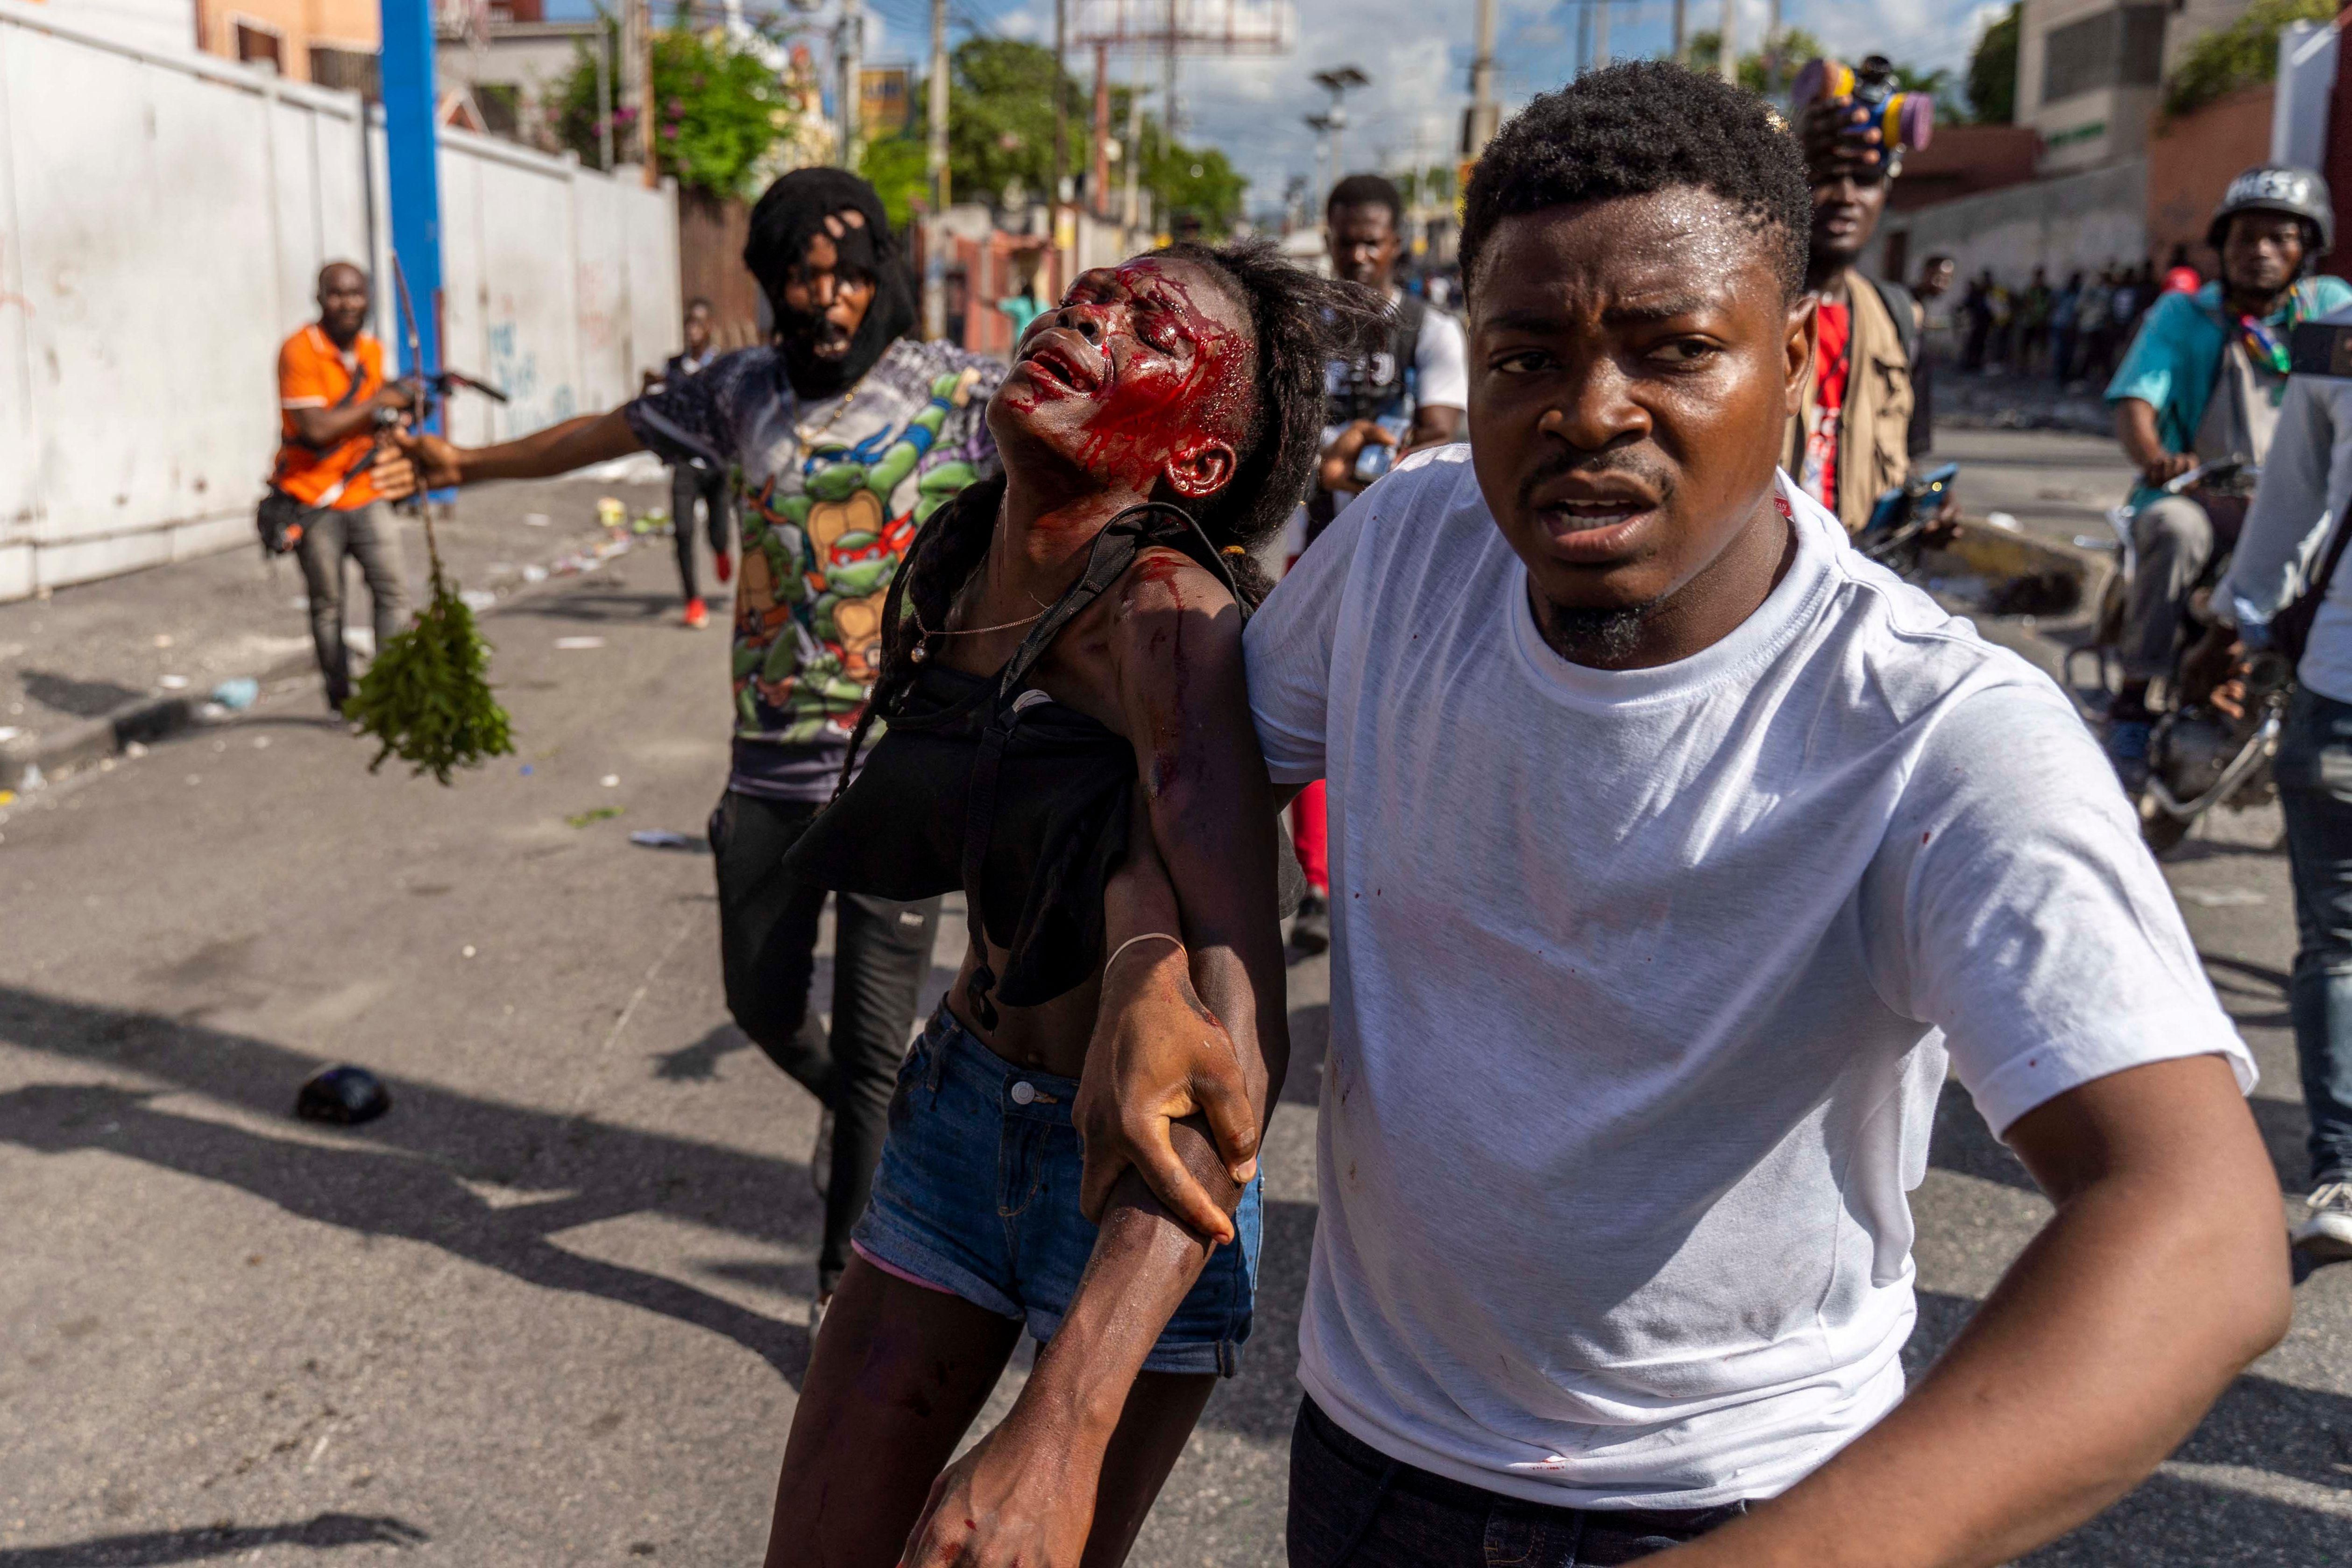 A man assists an injured woman during a protest demanding the resignation of Haitian Prime Minister Ariel Henry in Port-au-Prince, Haiti on October 10, 2022.